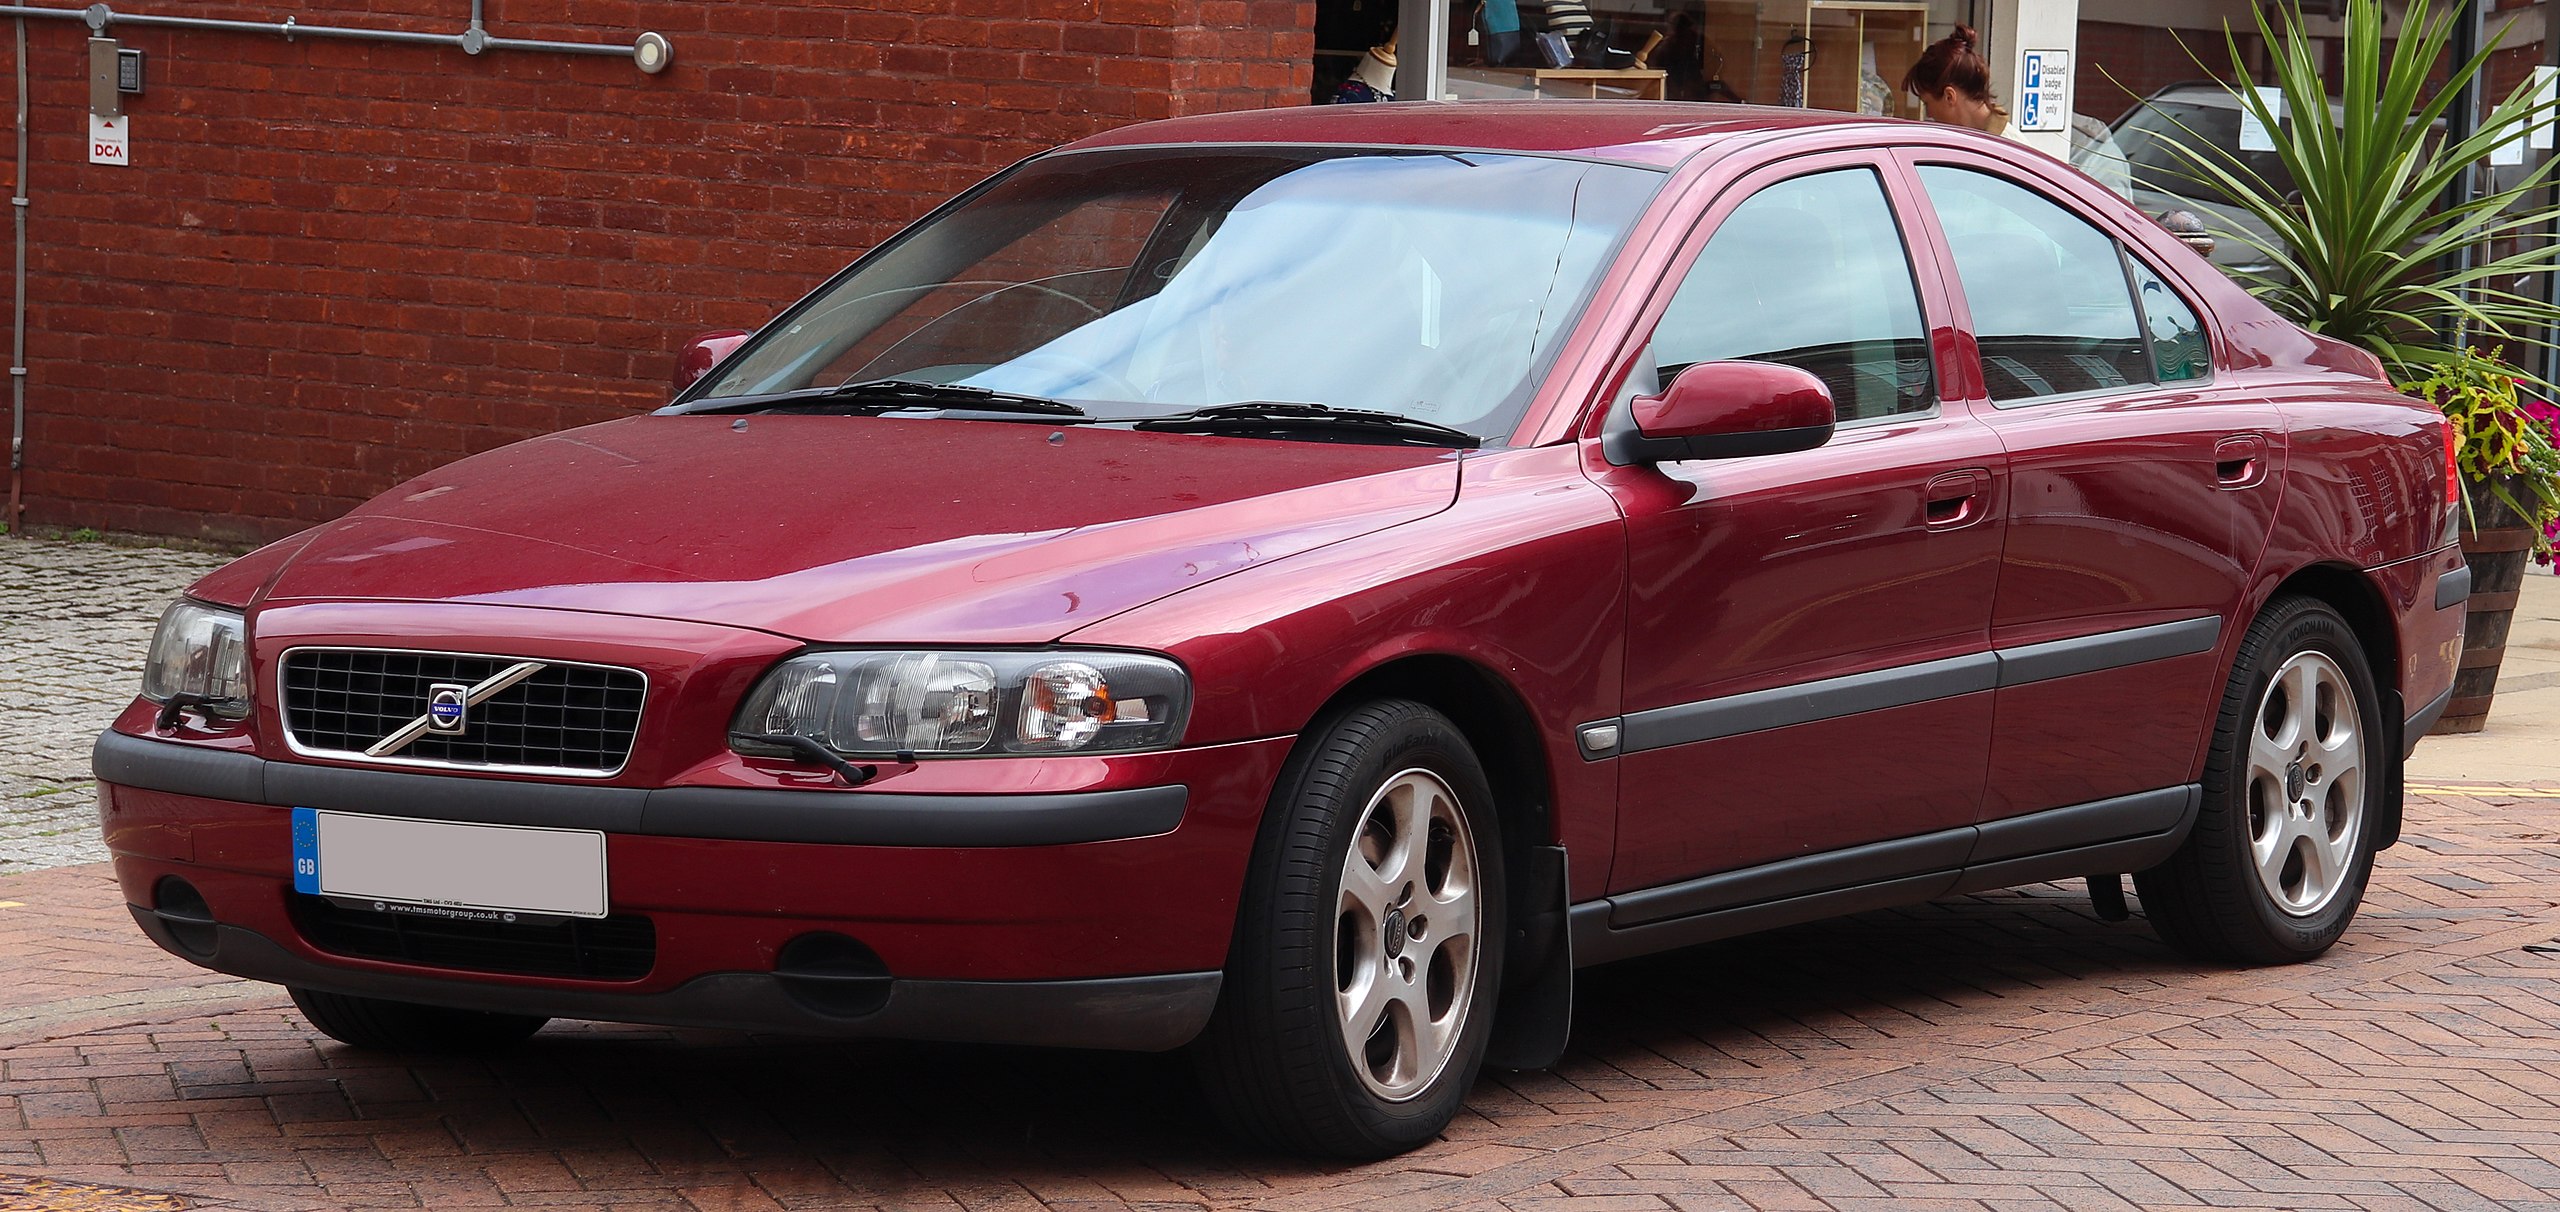 File:2002 Volvo S60 S T 2.0 Front.jpg - Wikimedia Commons